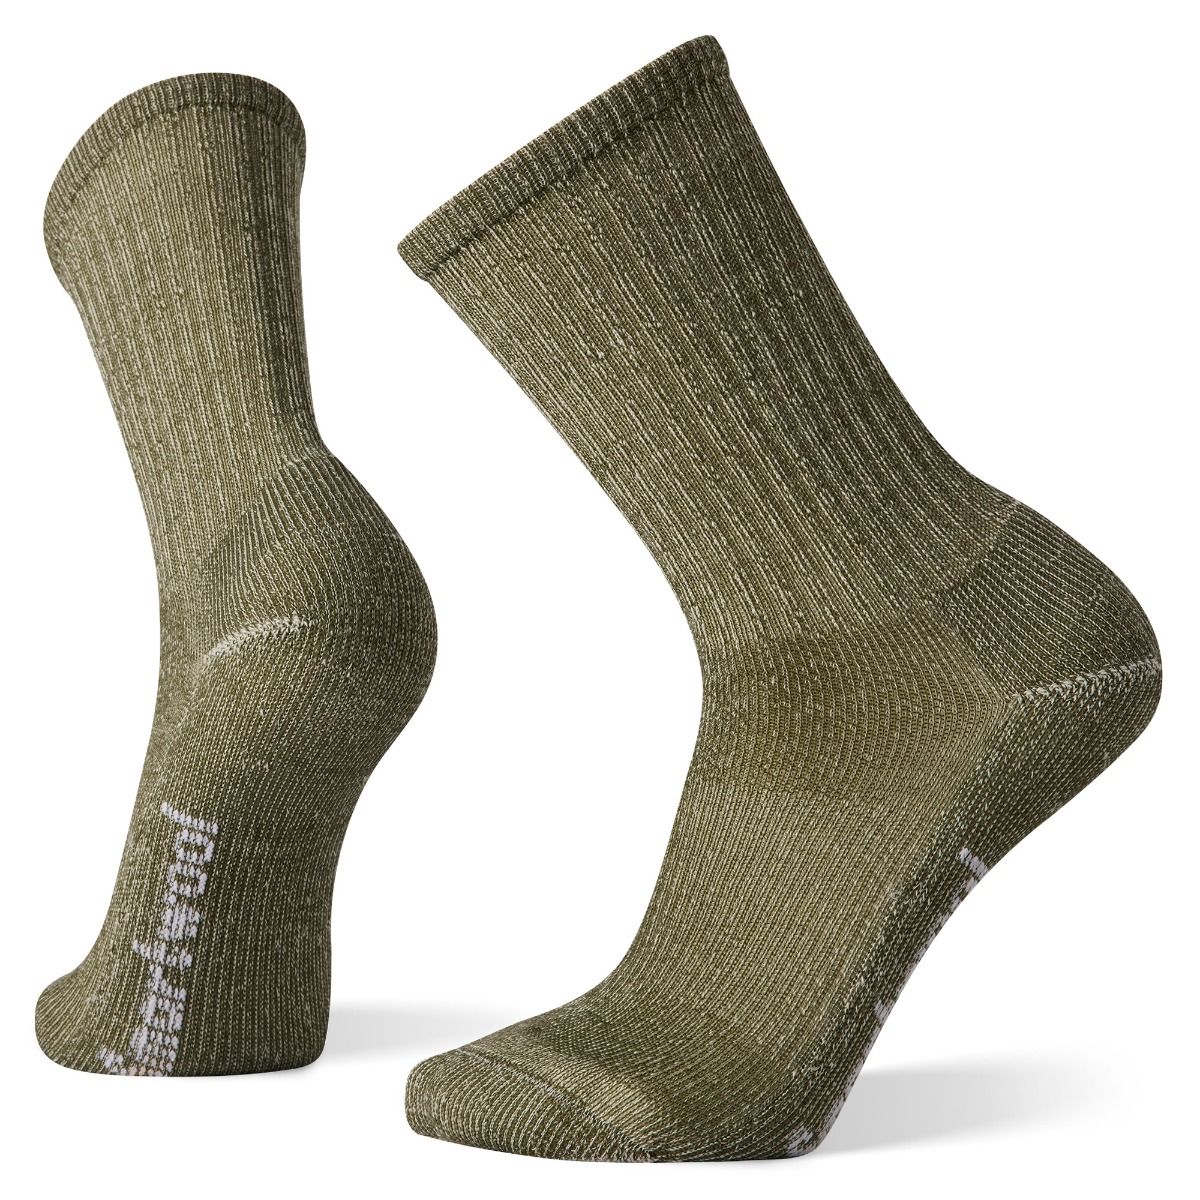 Smartwool launches “Second Cut Hike Sock” from recycled socks